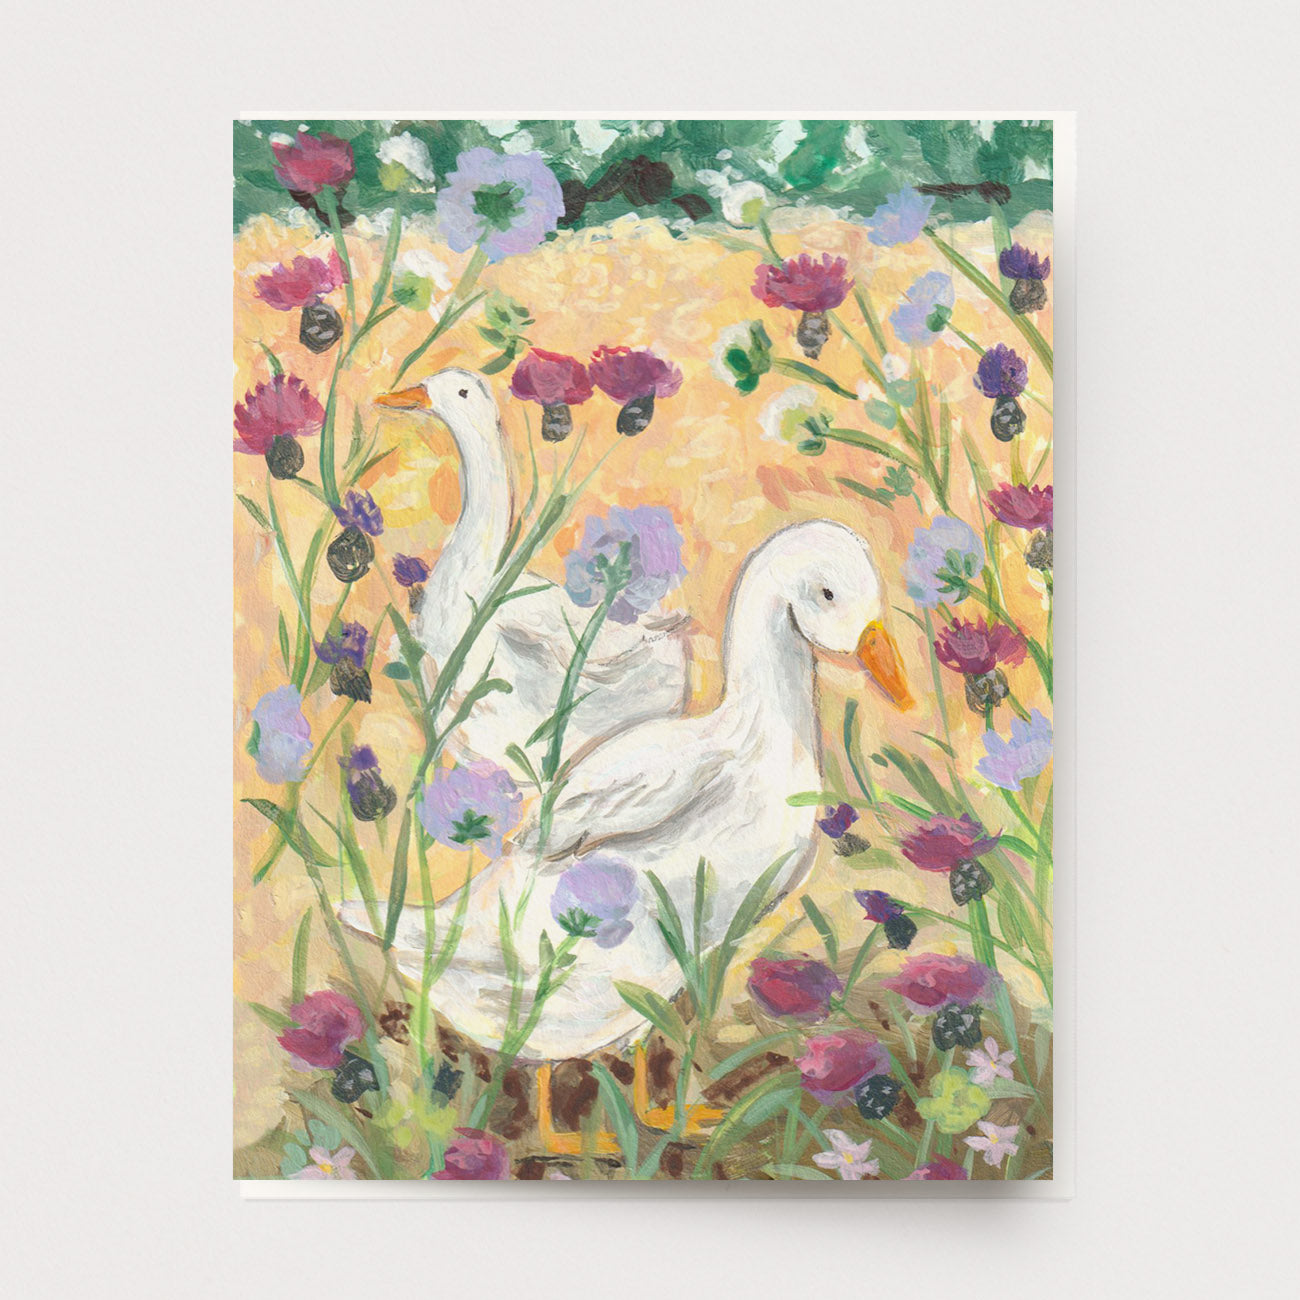 Greeting card of ducks in a meadow of flowers, Ingrid Press made in the USA